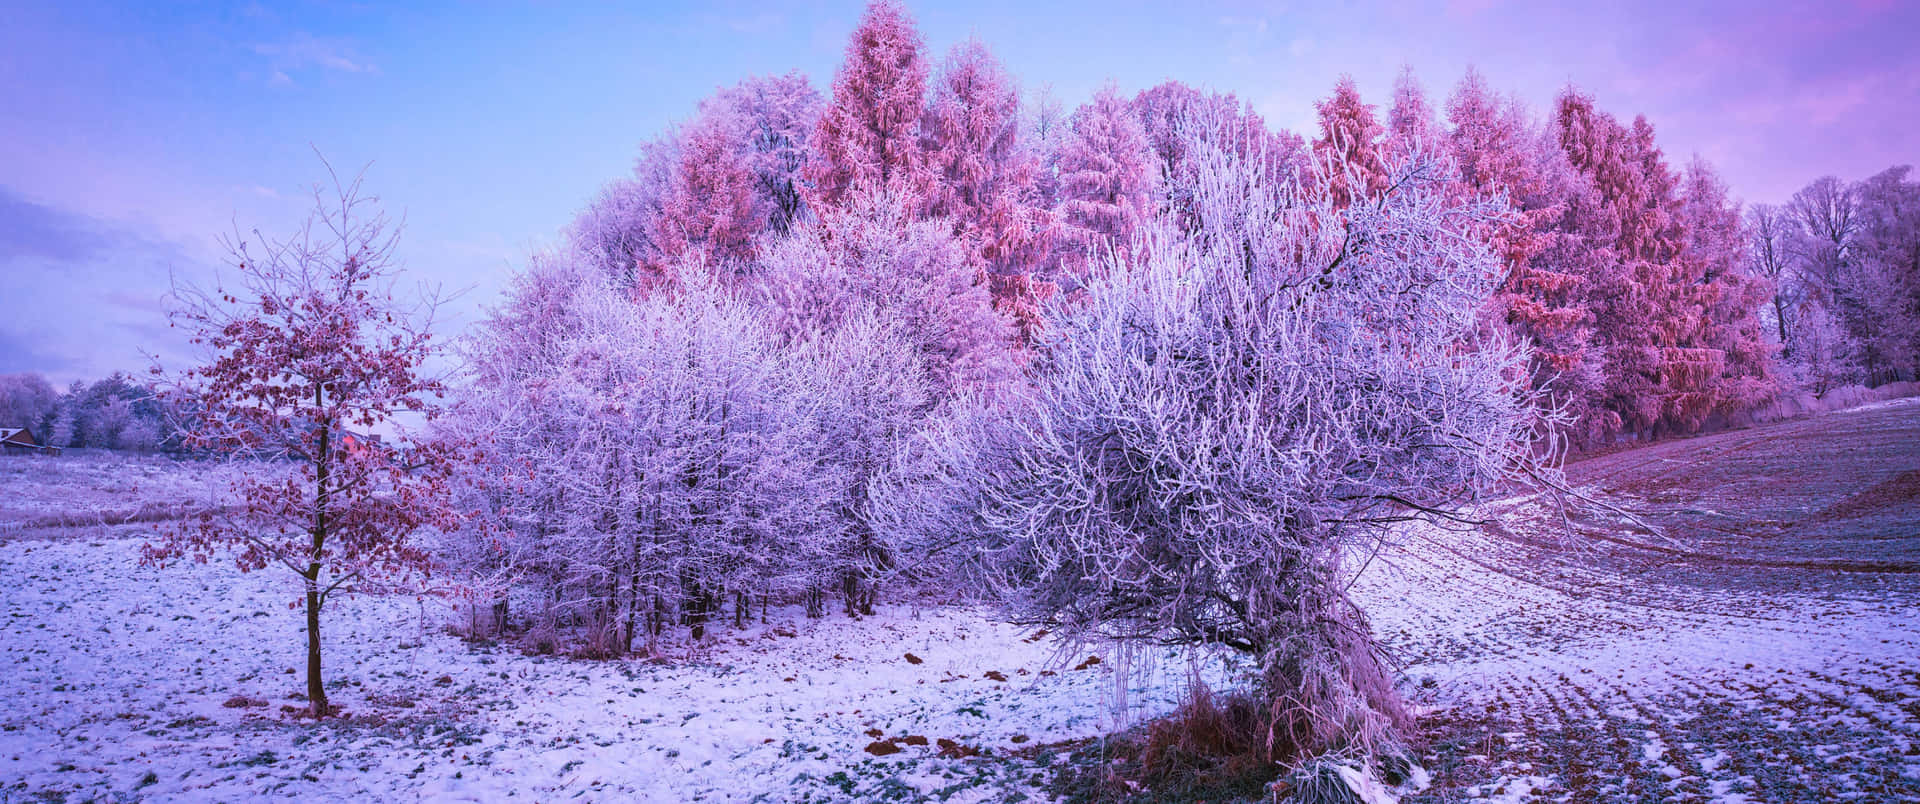 A Snowy Field With Trees And A Pink Sky Wallpaper